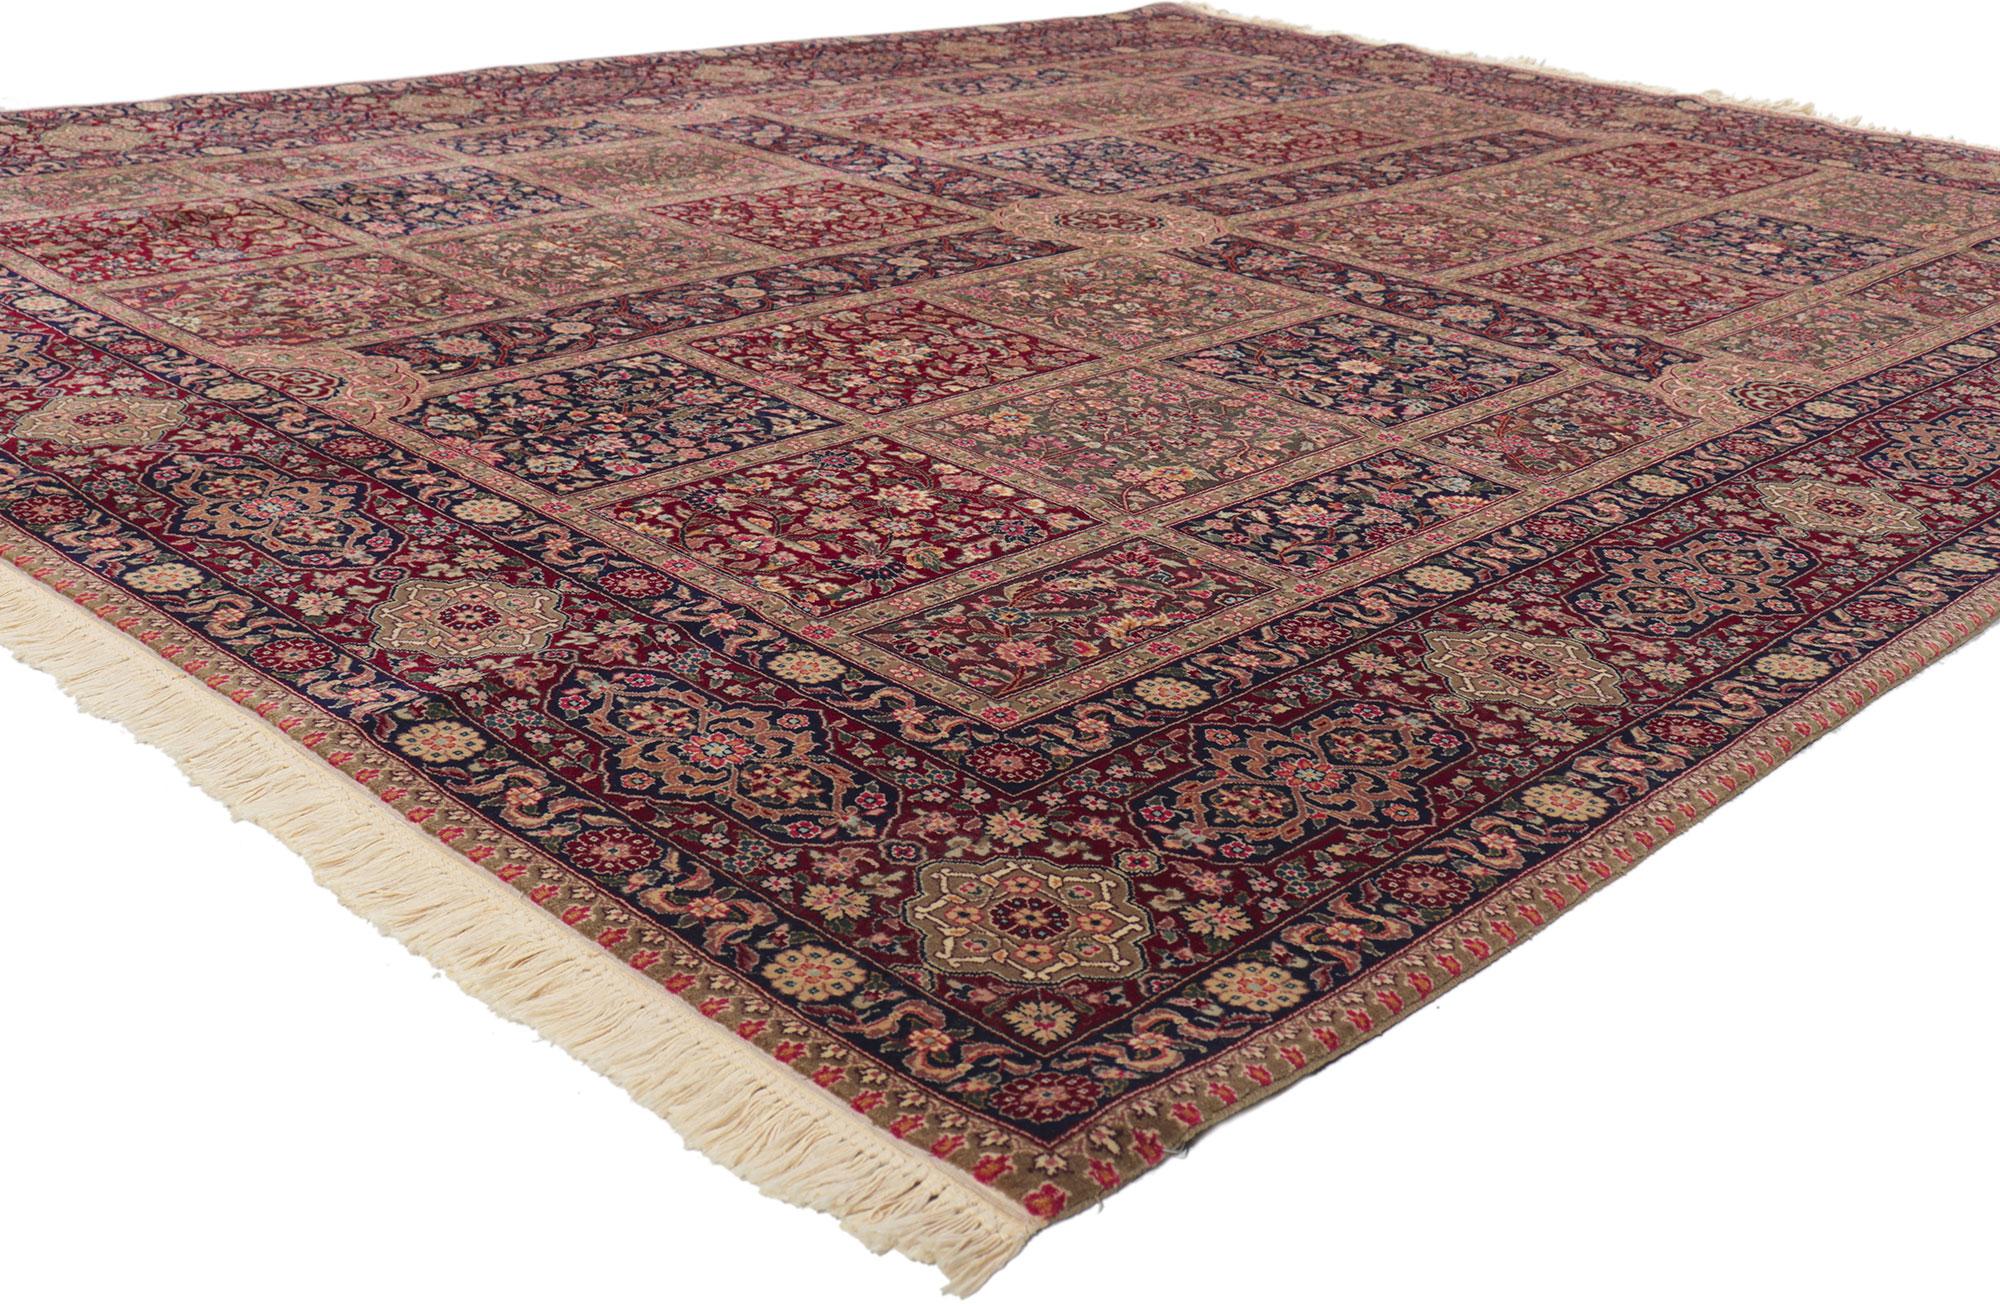 76846 Vintage Pakistan Garden Rug, 07'10 x 09'11.
Emanating a timeless design and beguiling beauty in saturated colors, this hand knotted wool vintage Persian style Pakistan rug is poised to impress. The intricate Chahar Bagh design and rich color